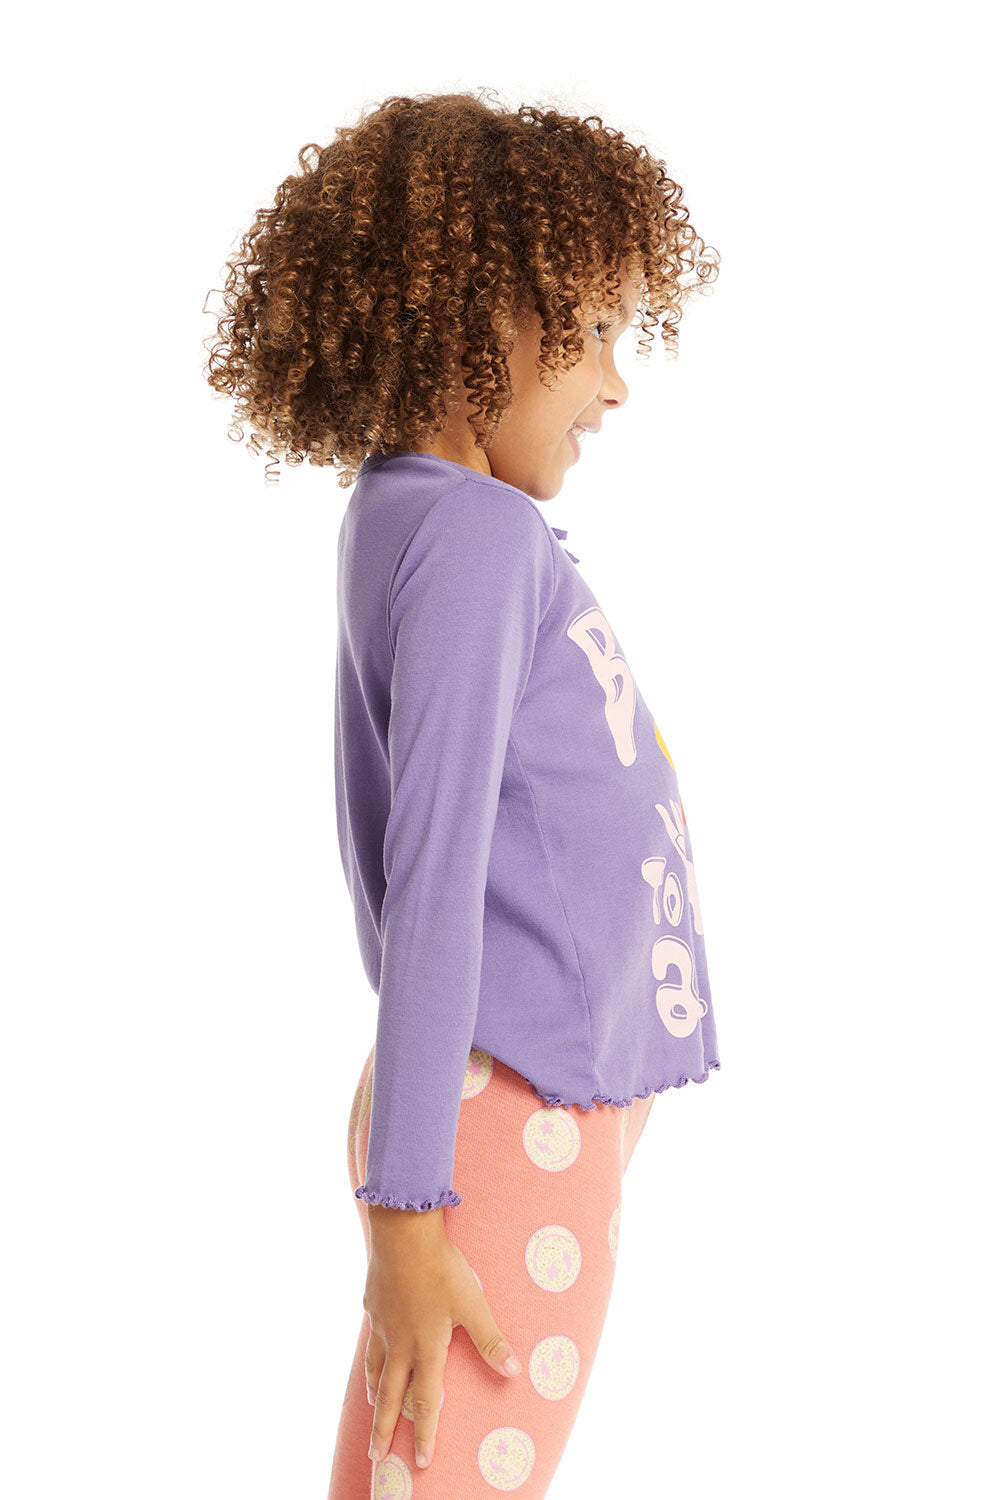 Be Kind Long Sleeve GIRLS chaserbrand